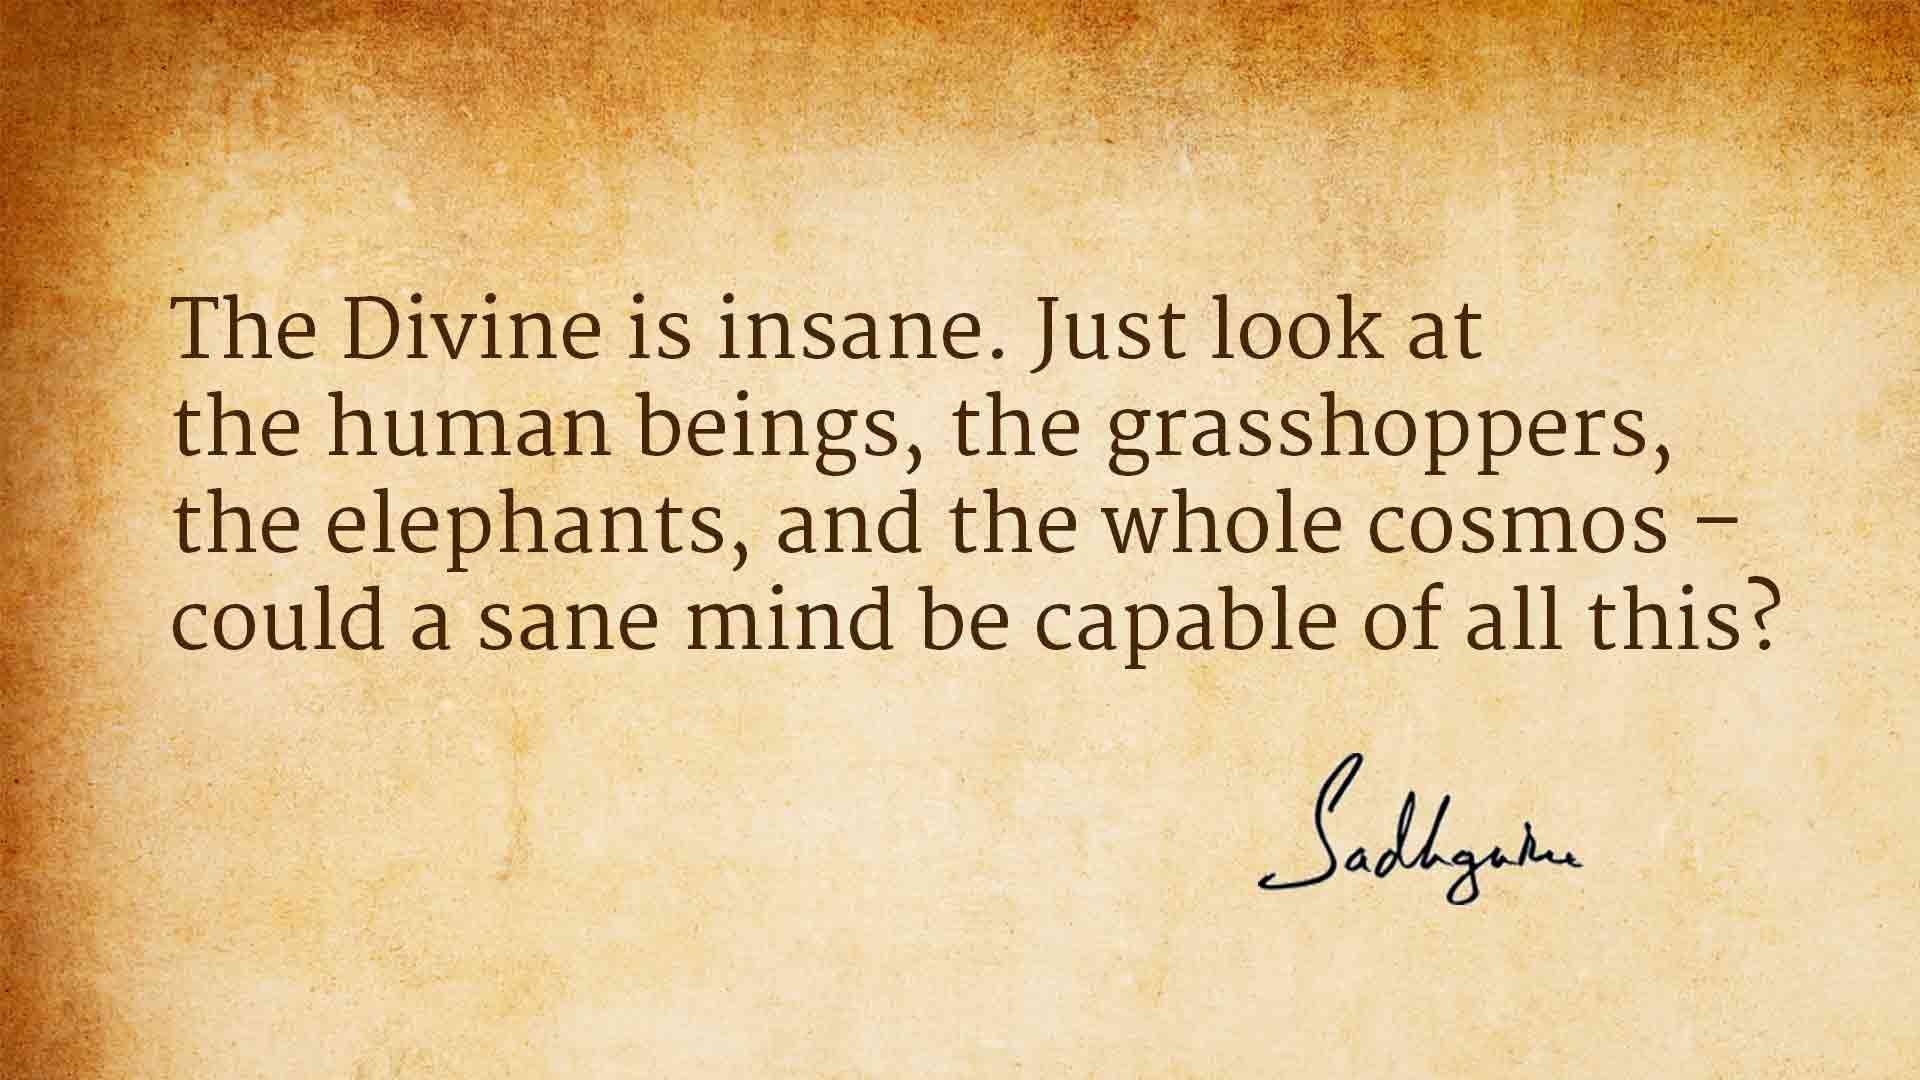 the divine is insane. just look at the human beings, the grasshoppers the elephants and the whole cosmos could a sane mind be capable of all this